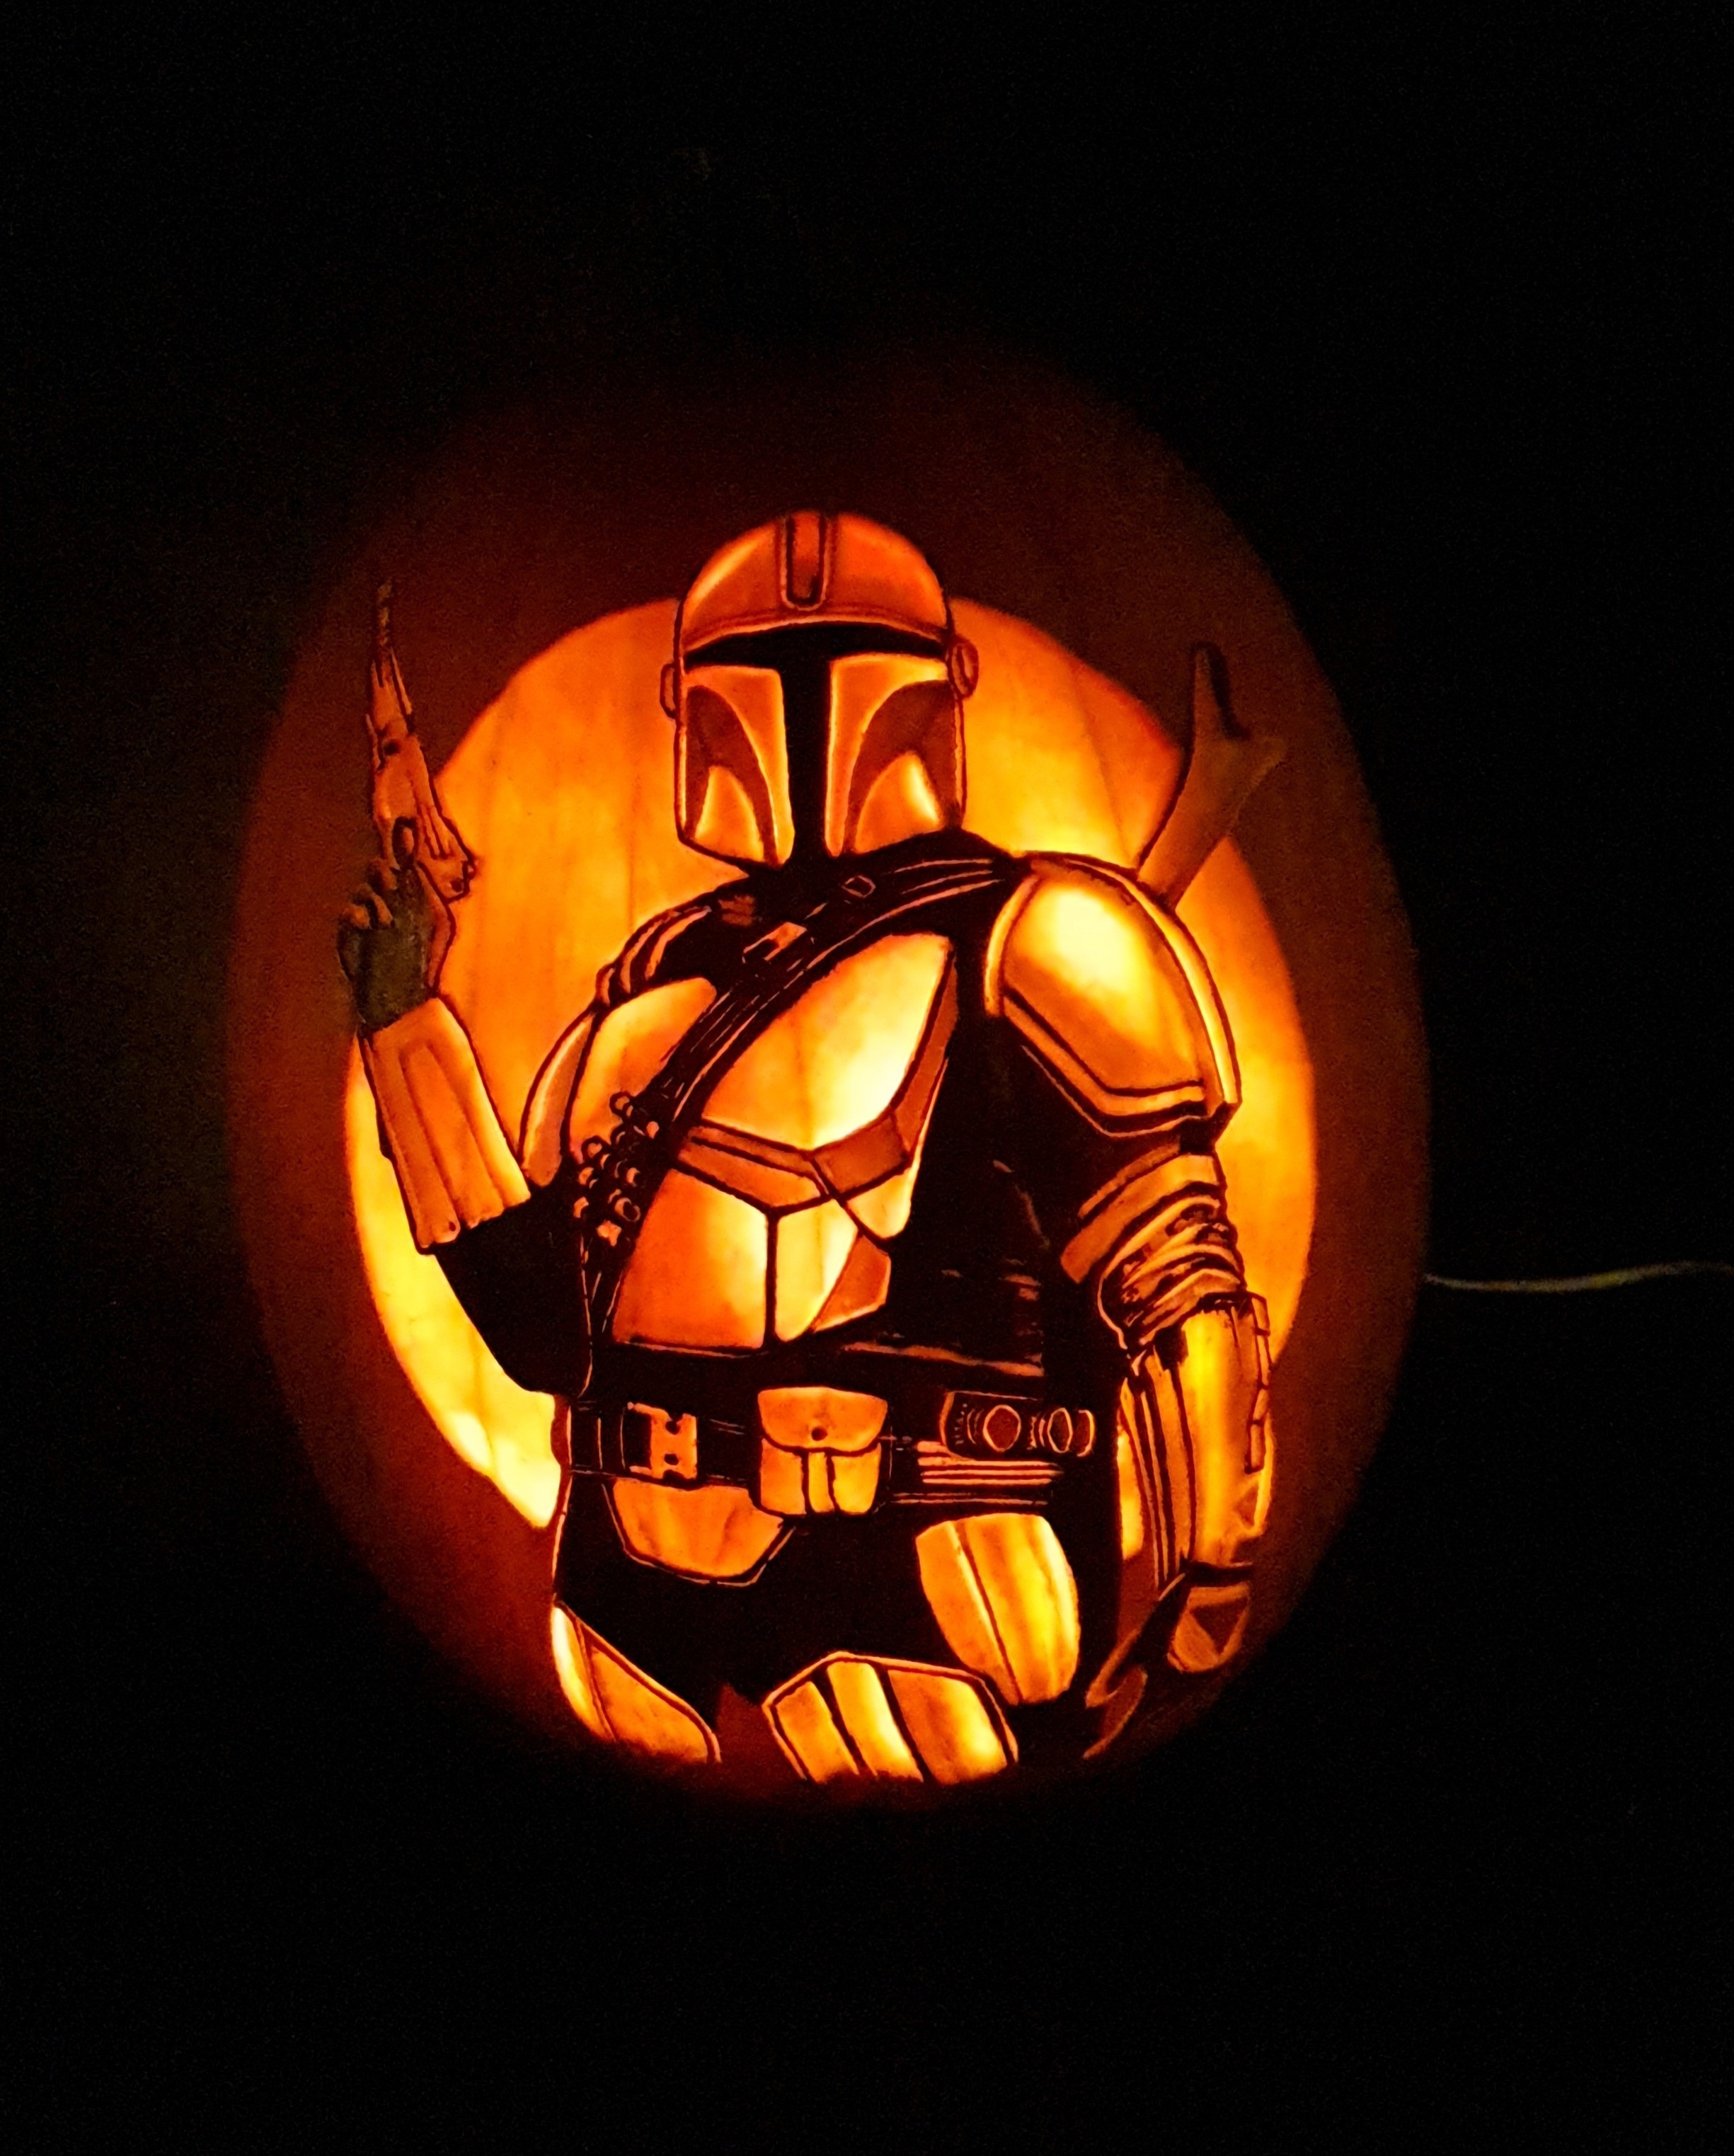 The Mandalorian carved on a pumpkin